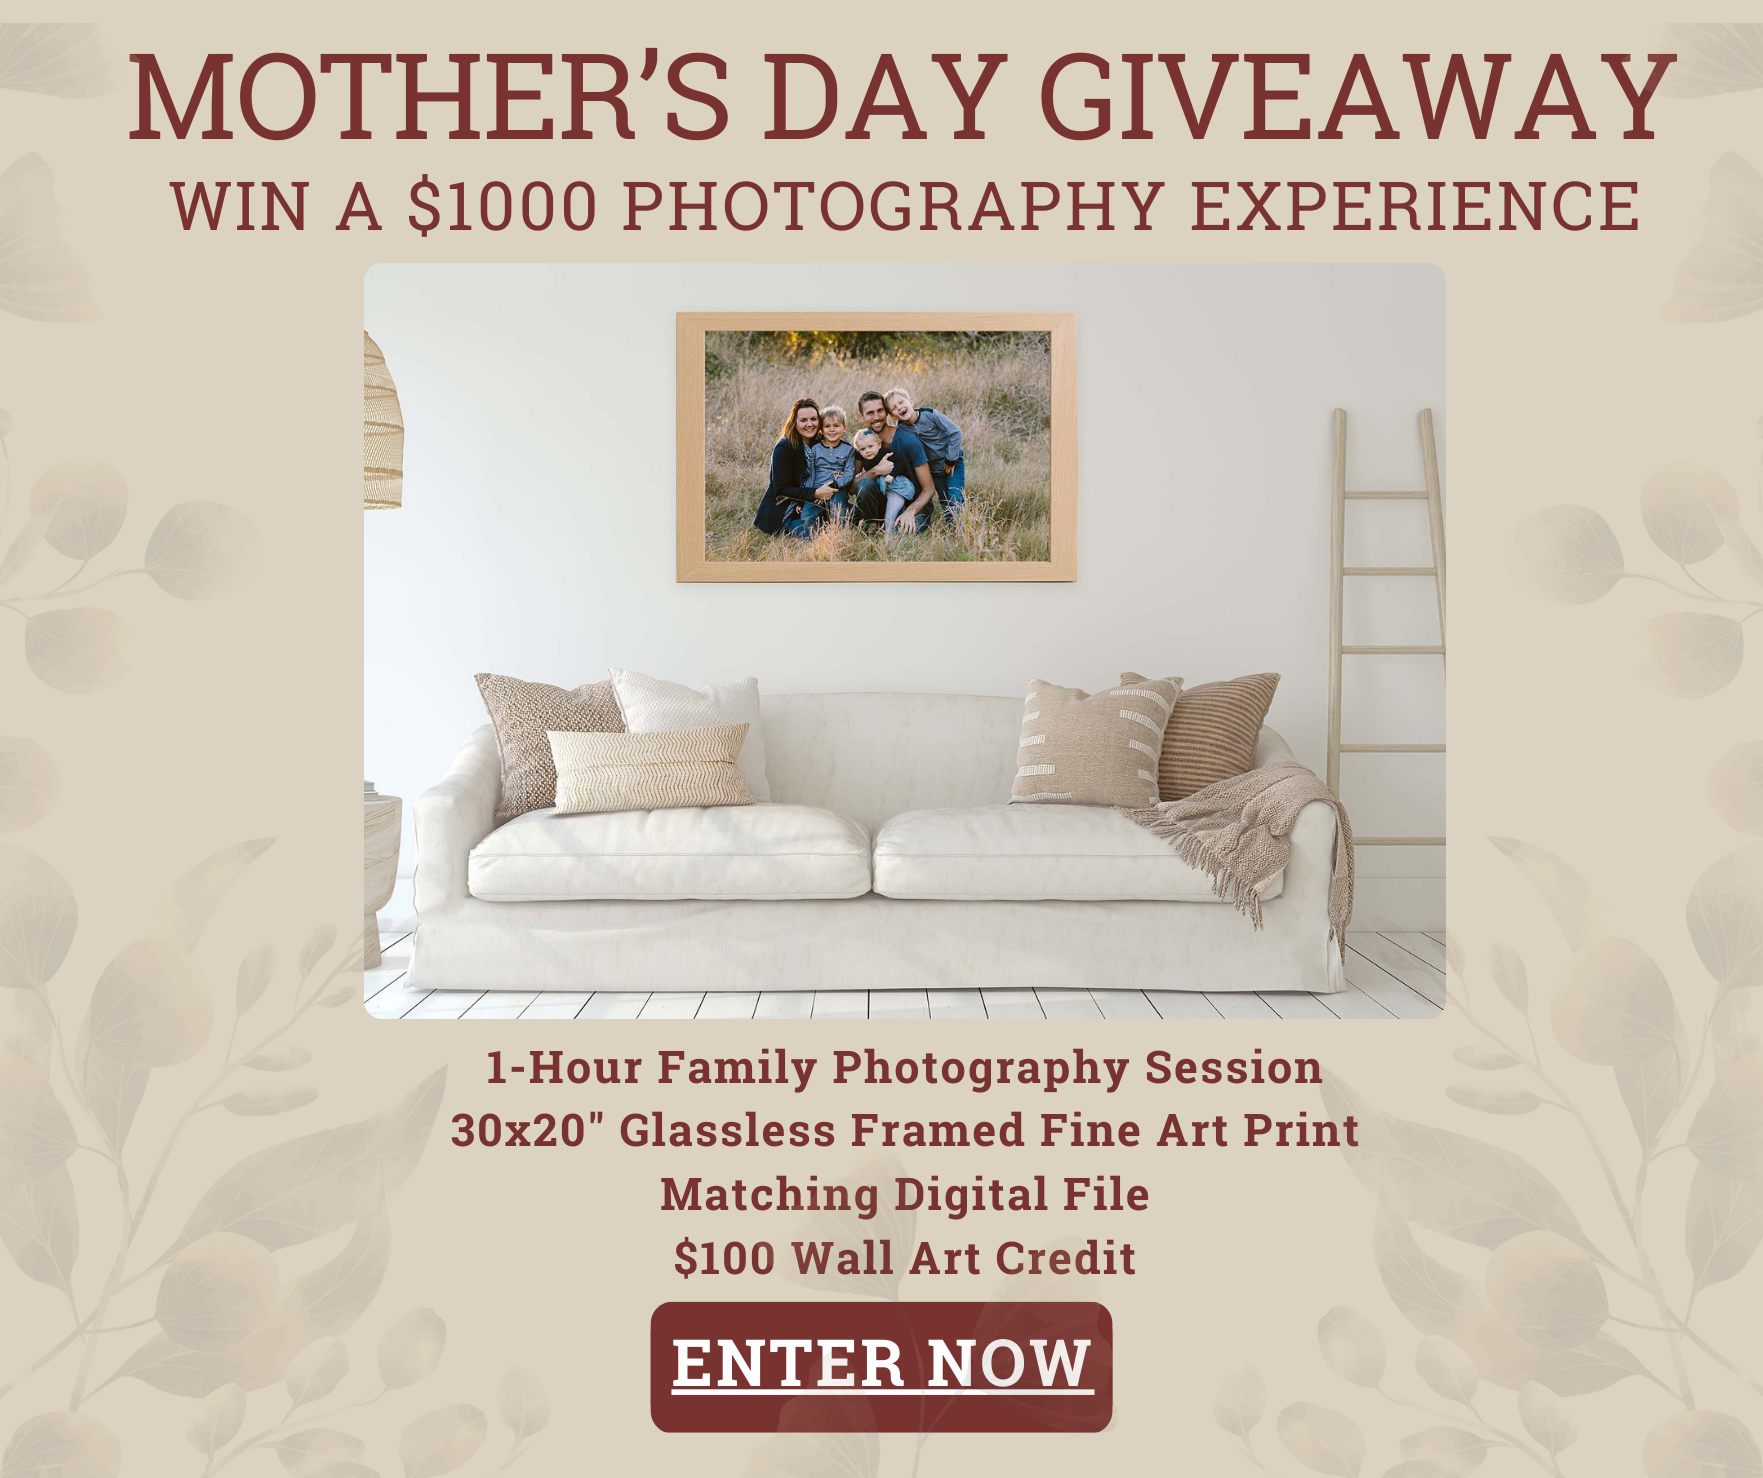 Mother's Day GIVEAWAY